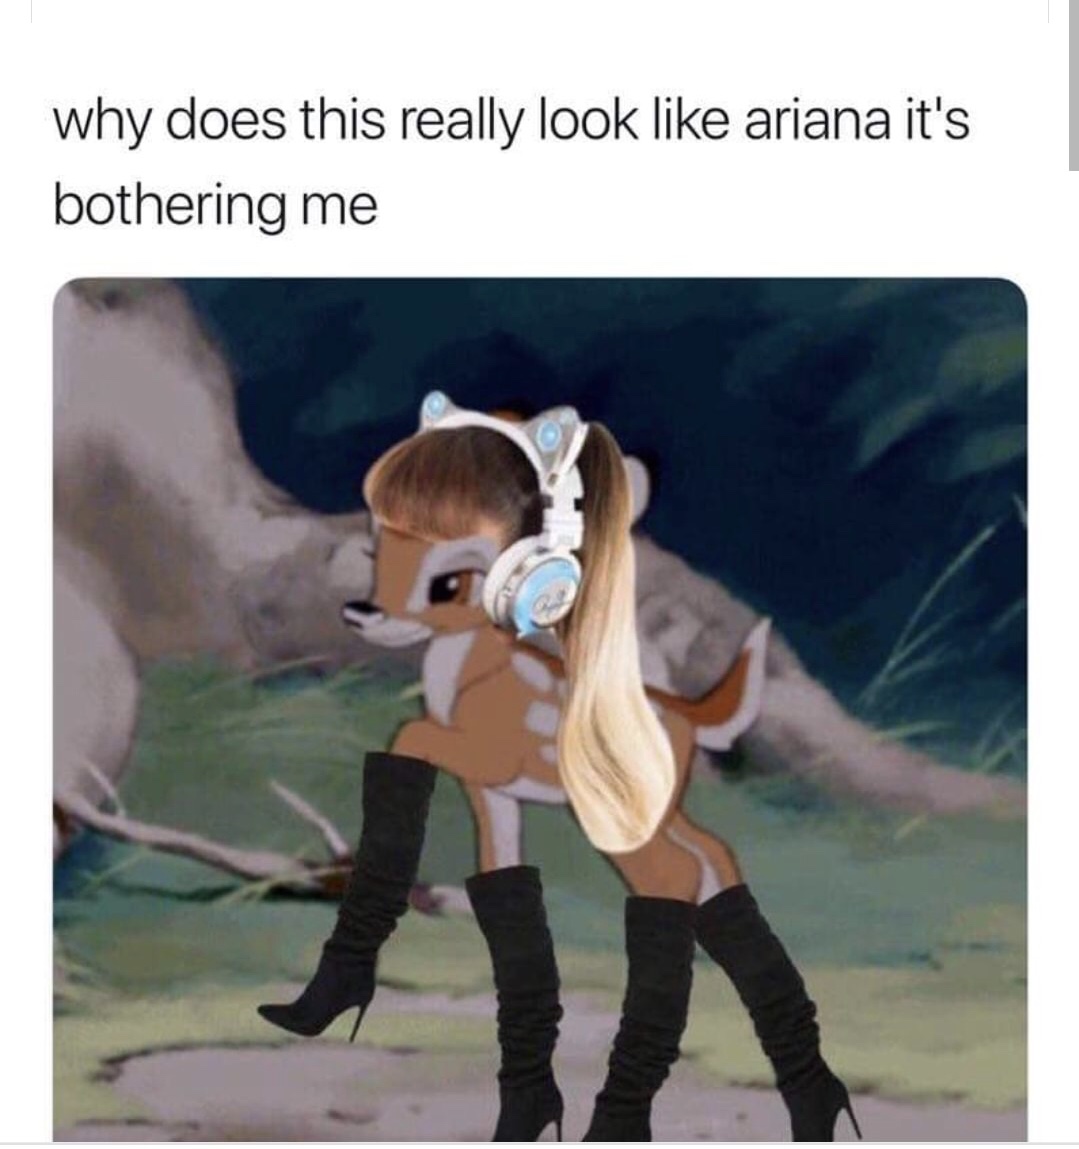 ariana grande bambi meme - why does this really look ariana it's bothering me